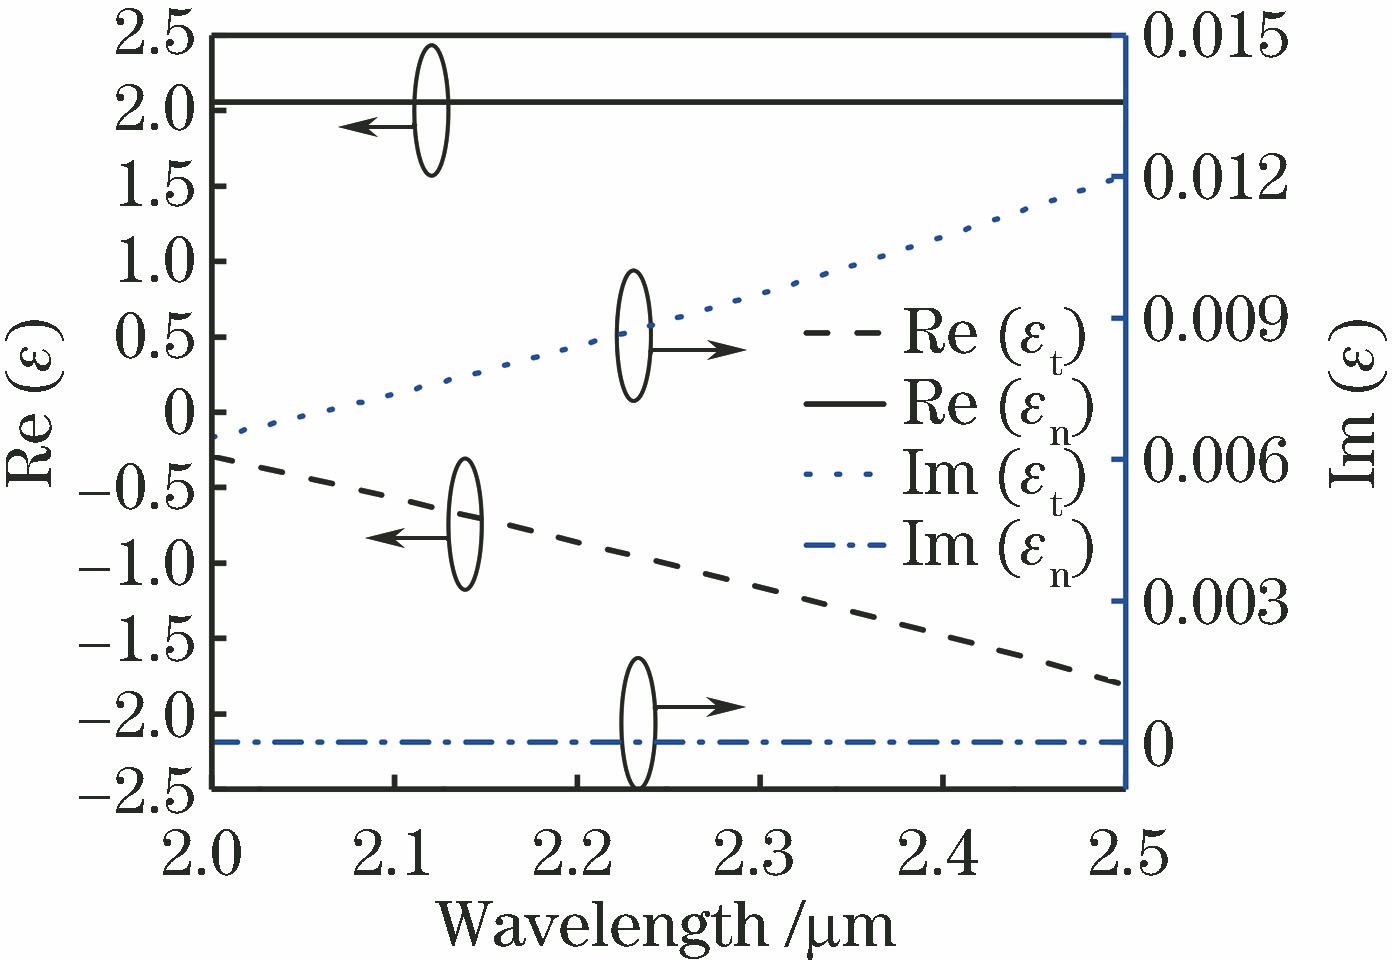 Equivalent dielectric tensor components of GDM-HMMs